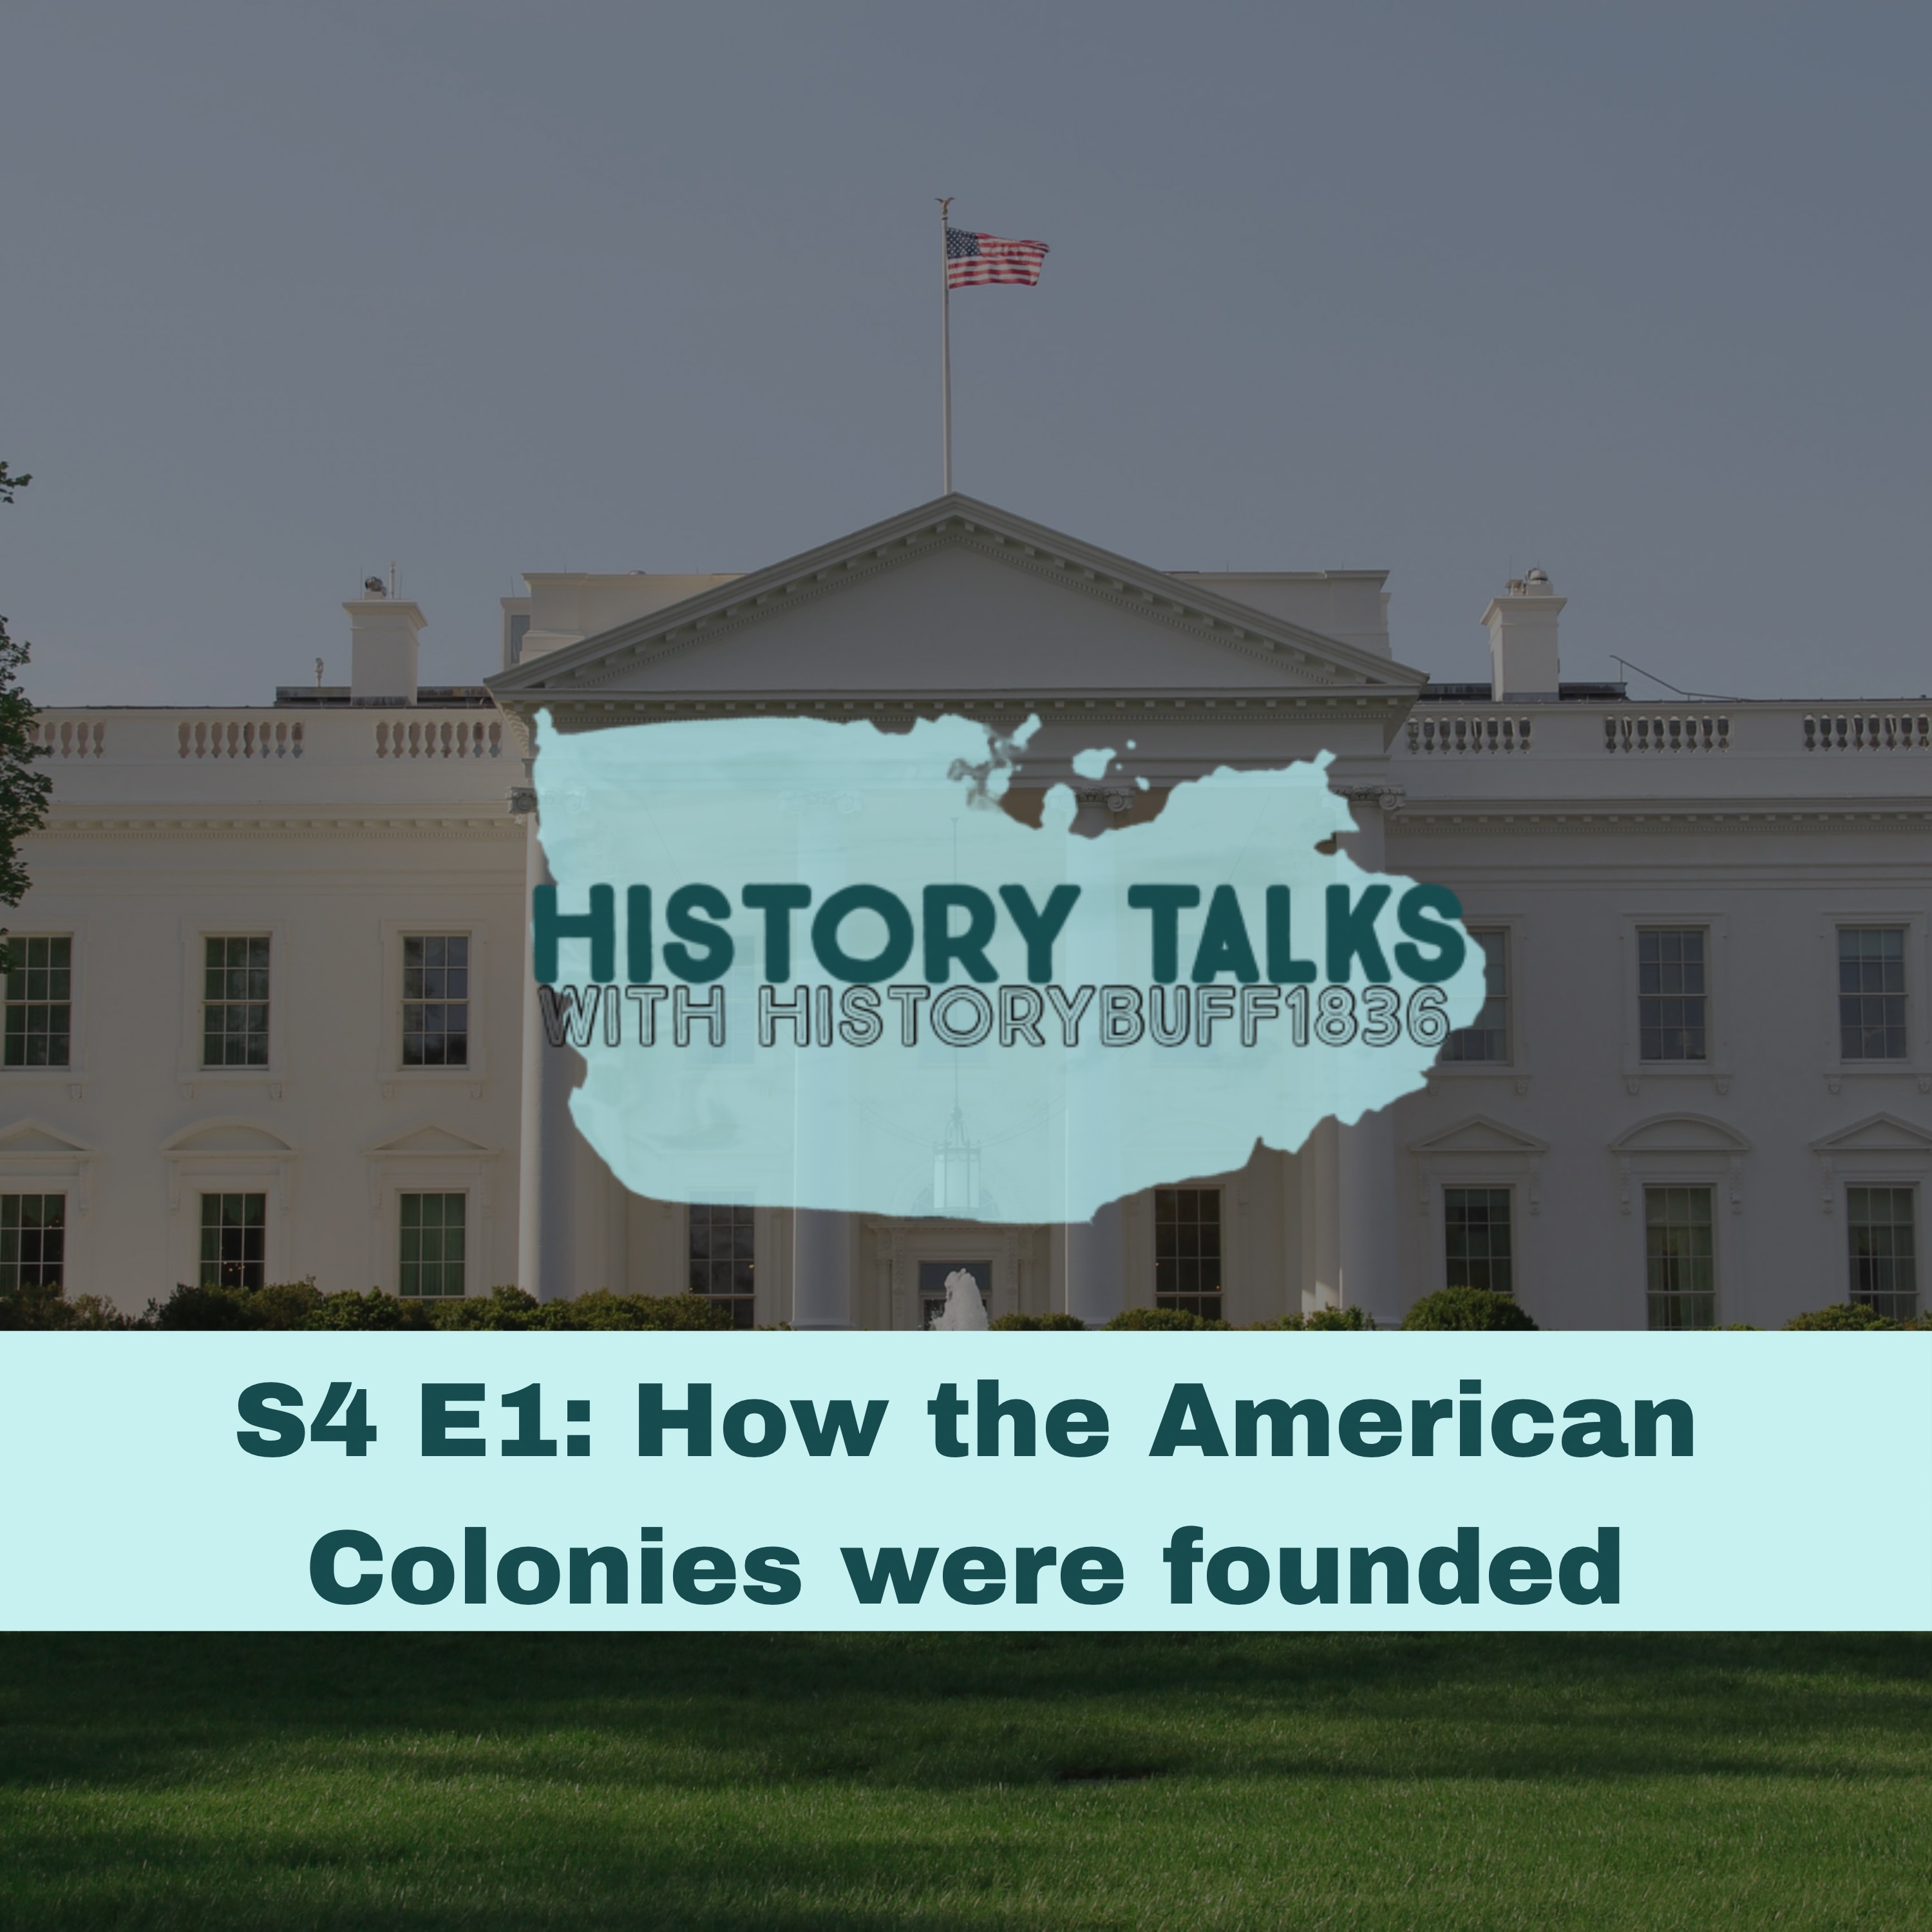 How American Colonies was founded